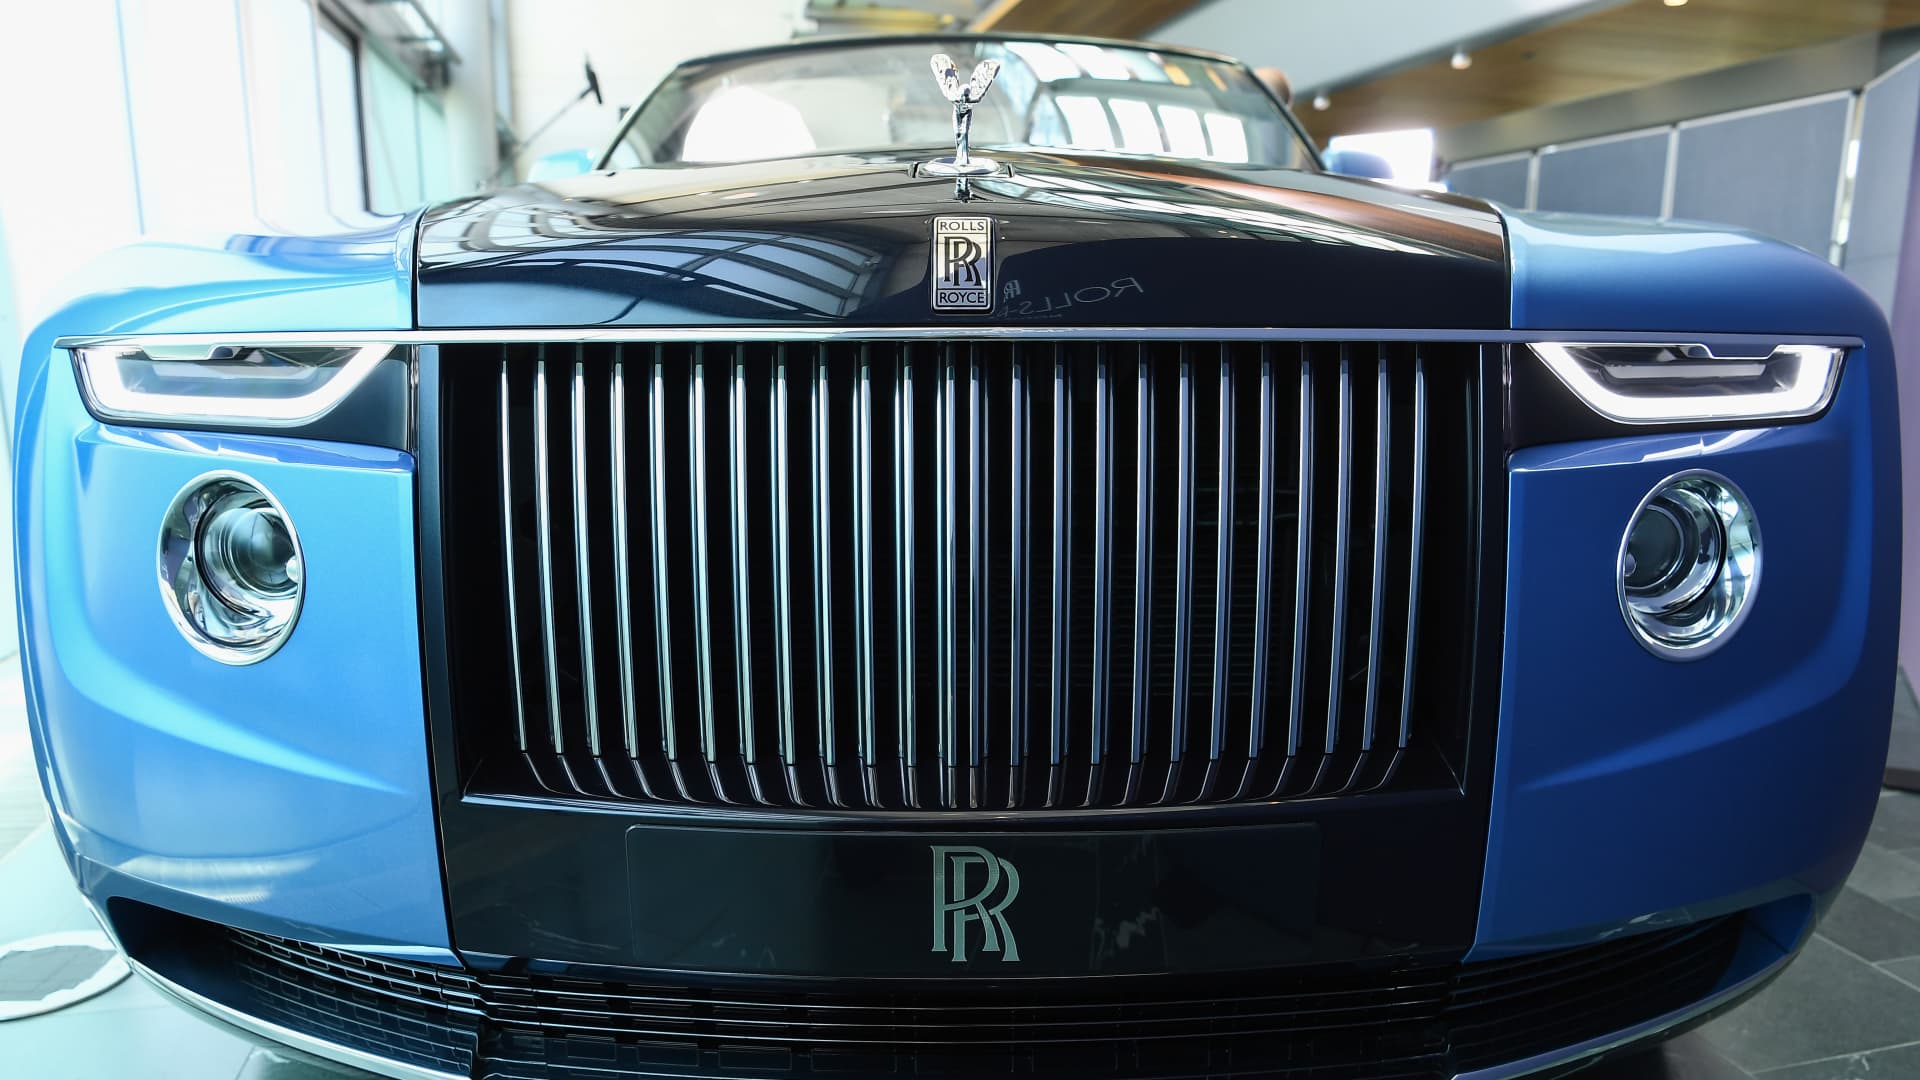 rolls-royce debuts pearl inspired 'boat tail' on the shores of